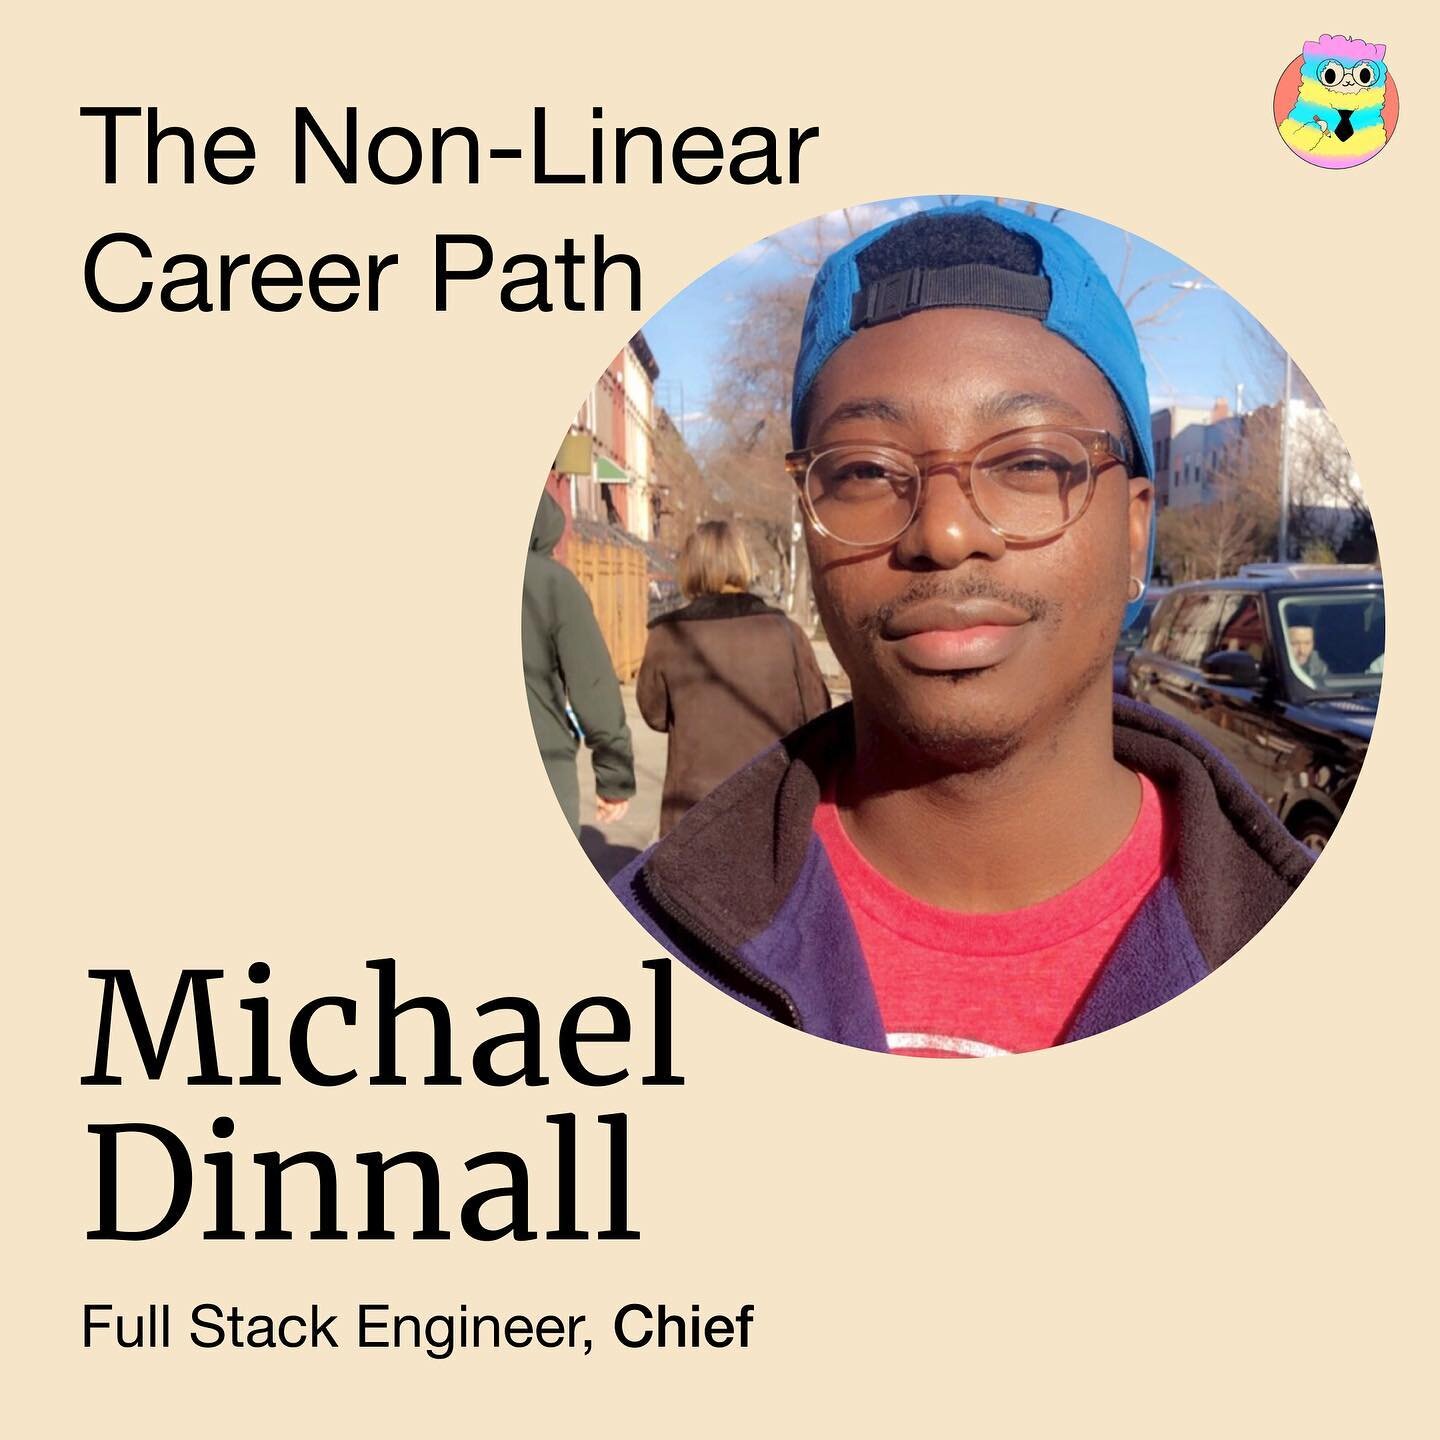 Michael came to Project Alpaca virtually to share his career journey from managing hospitals to being in the army to freelancing and now a full-stack engineer at Chief. He also shared his must-have skill to the Alpacees: communications. Always stayin